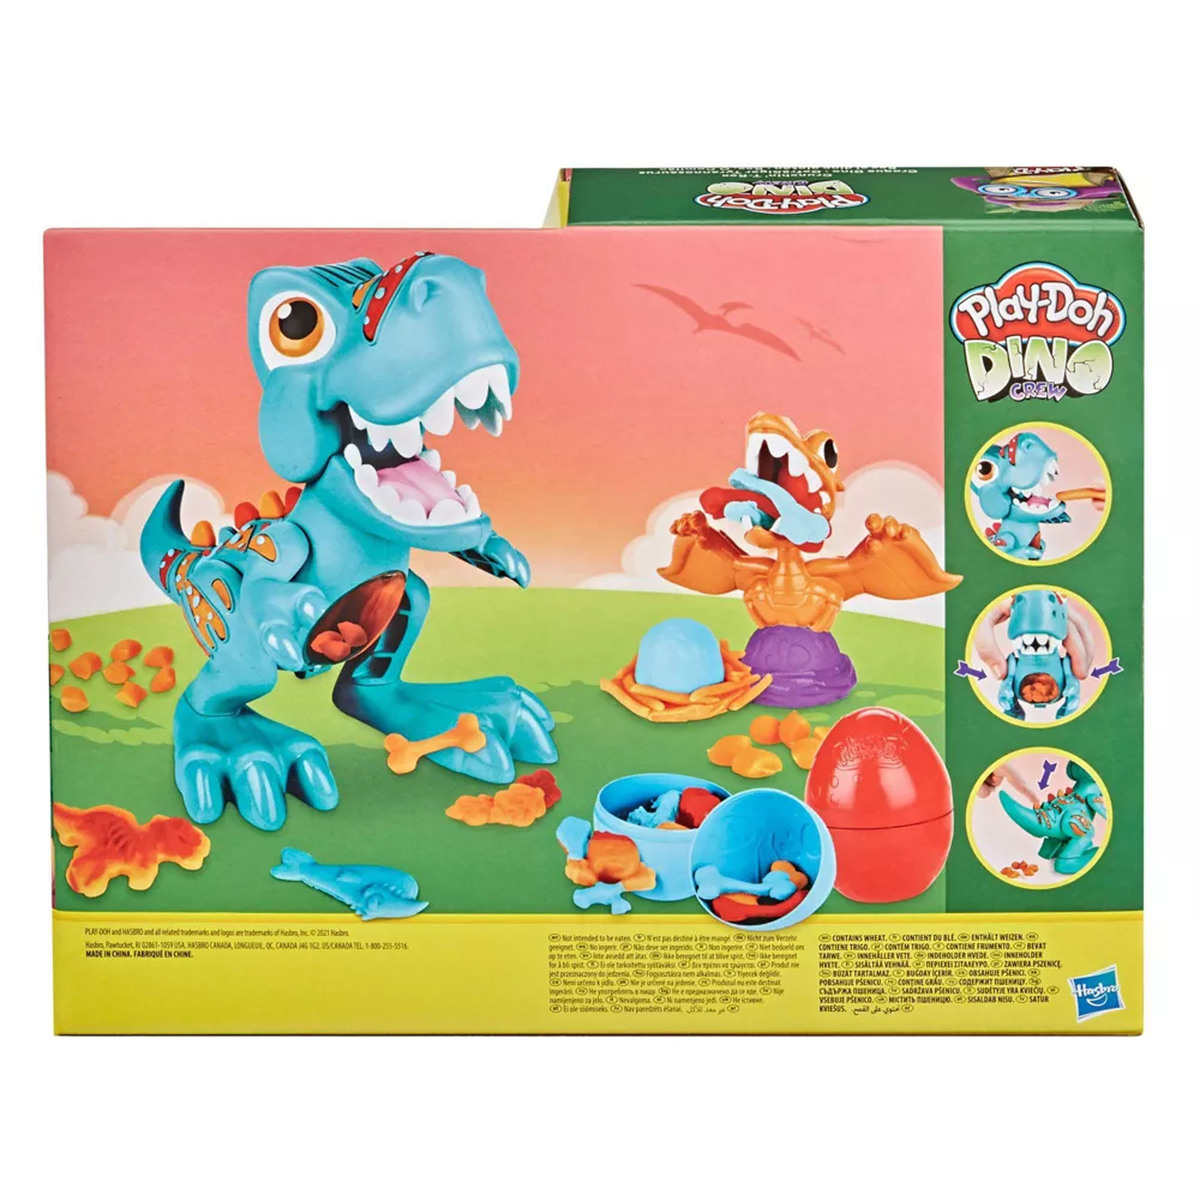 Playdoh Crunchin T Rex Art And Crafts Activity Toy for Kids, F1504